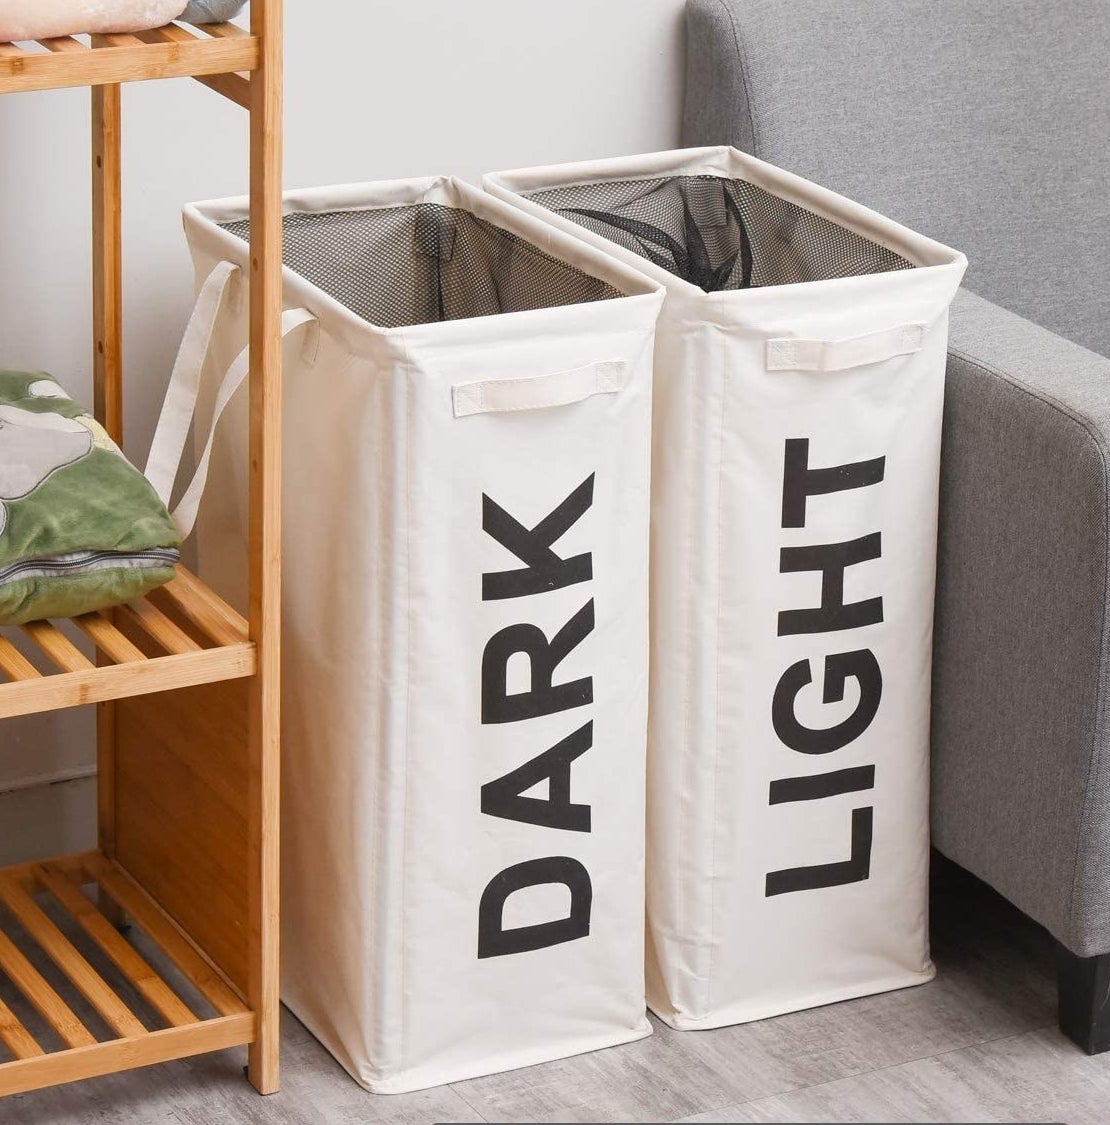 a pair of light and dark hampers tucked next to a couch